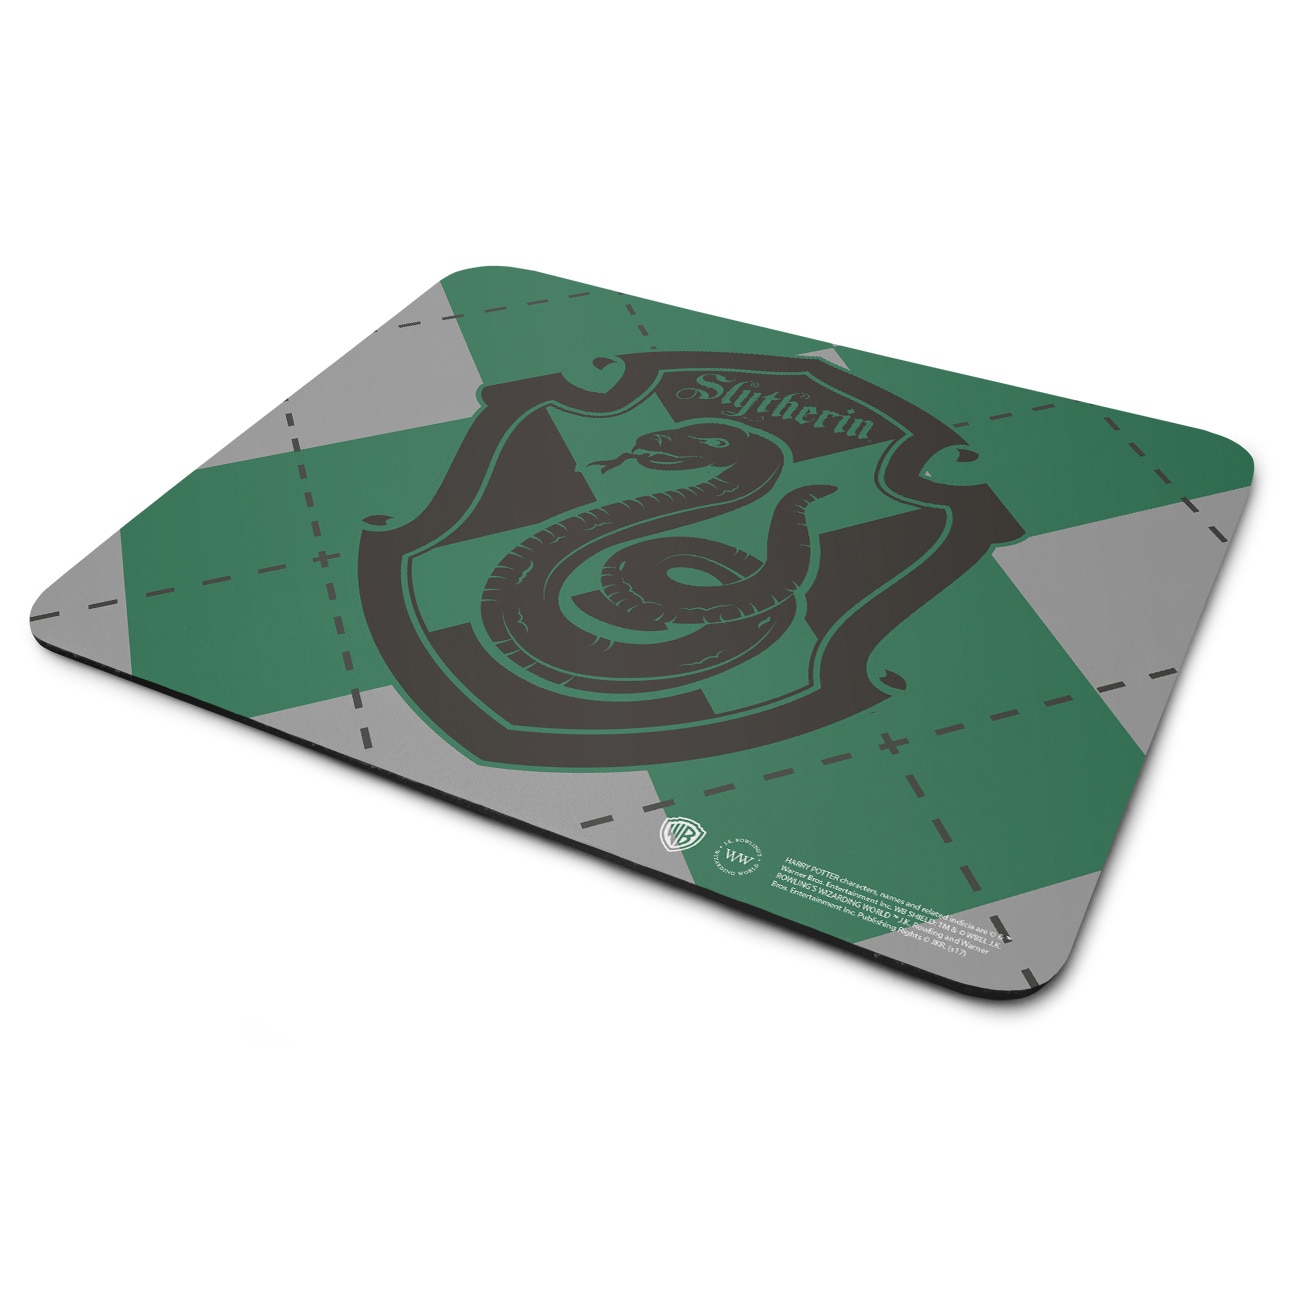 Slytherin Mouse Pad 3-Pack